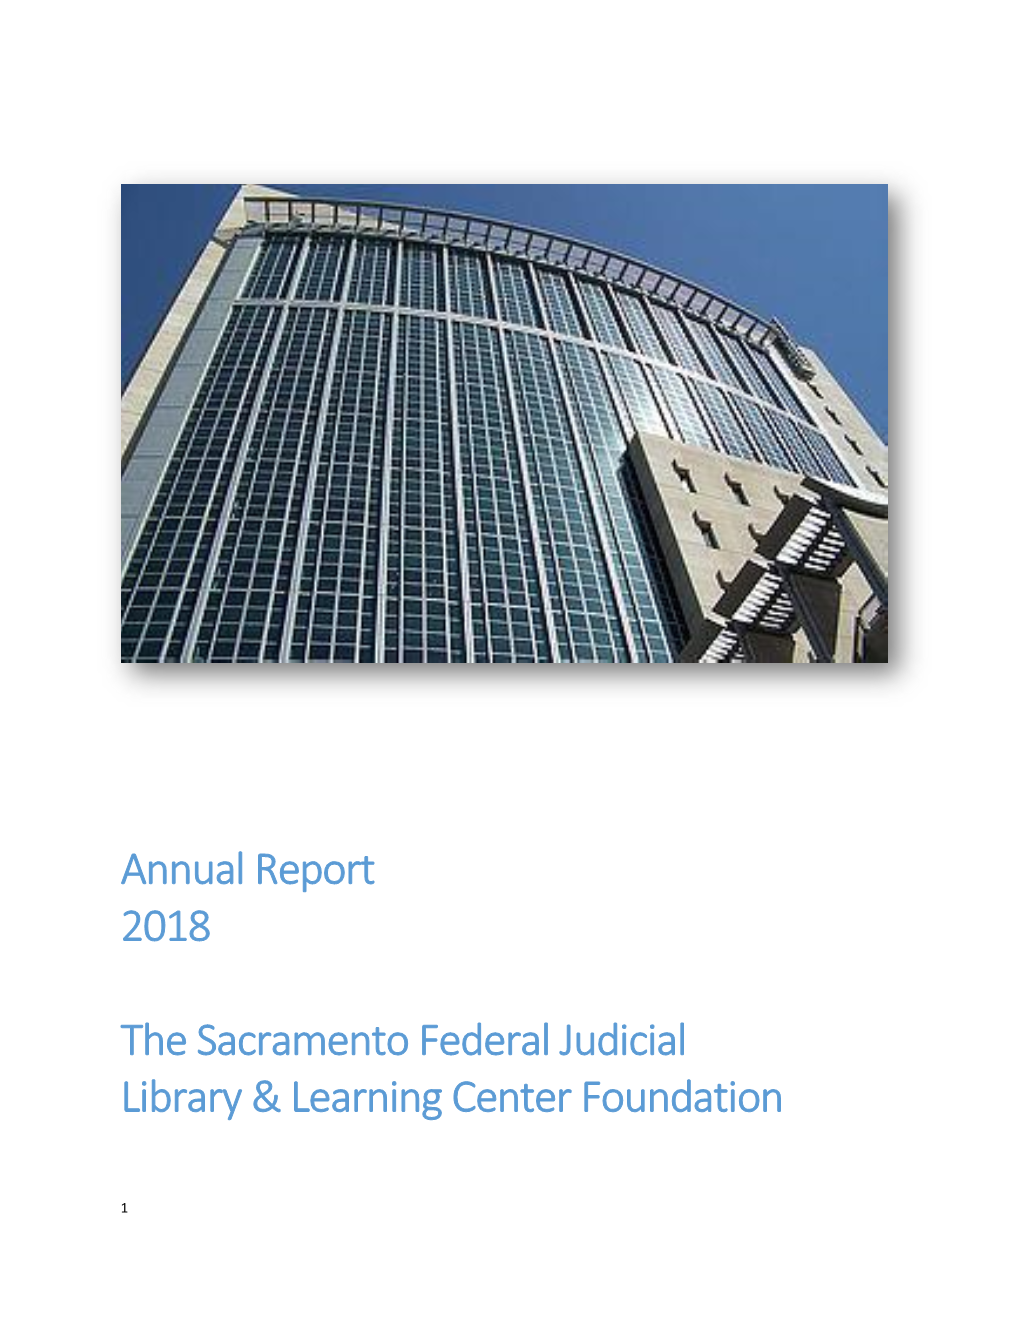 Annual Report 2018 the Sacramento Federal Judicial Library & Learning